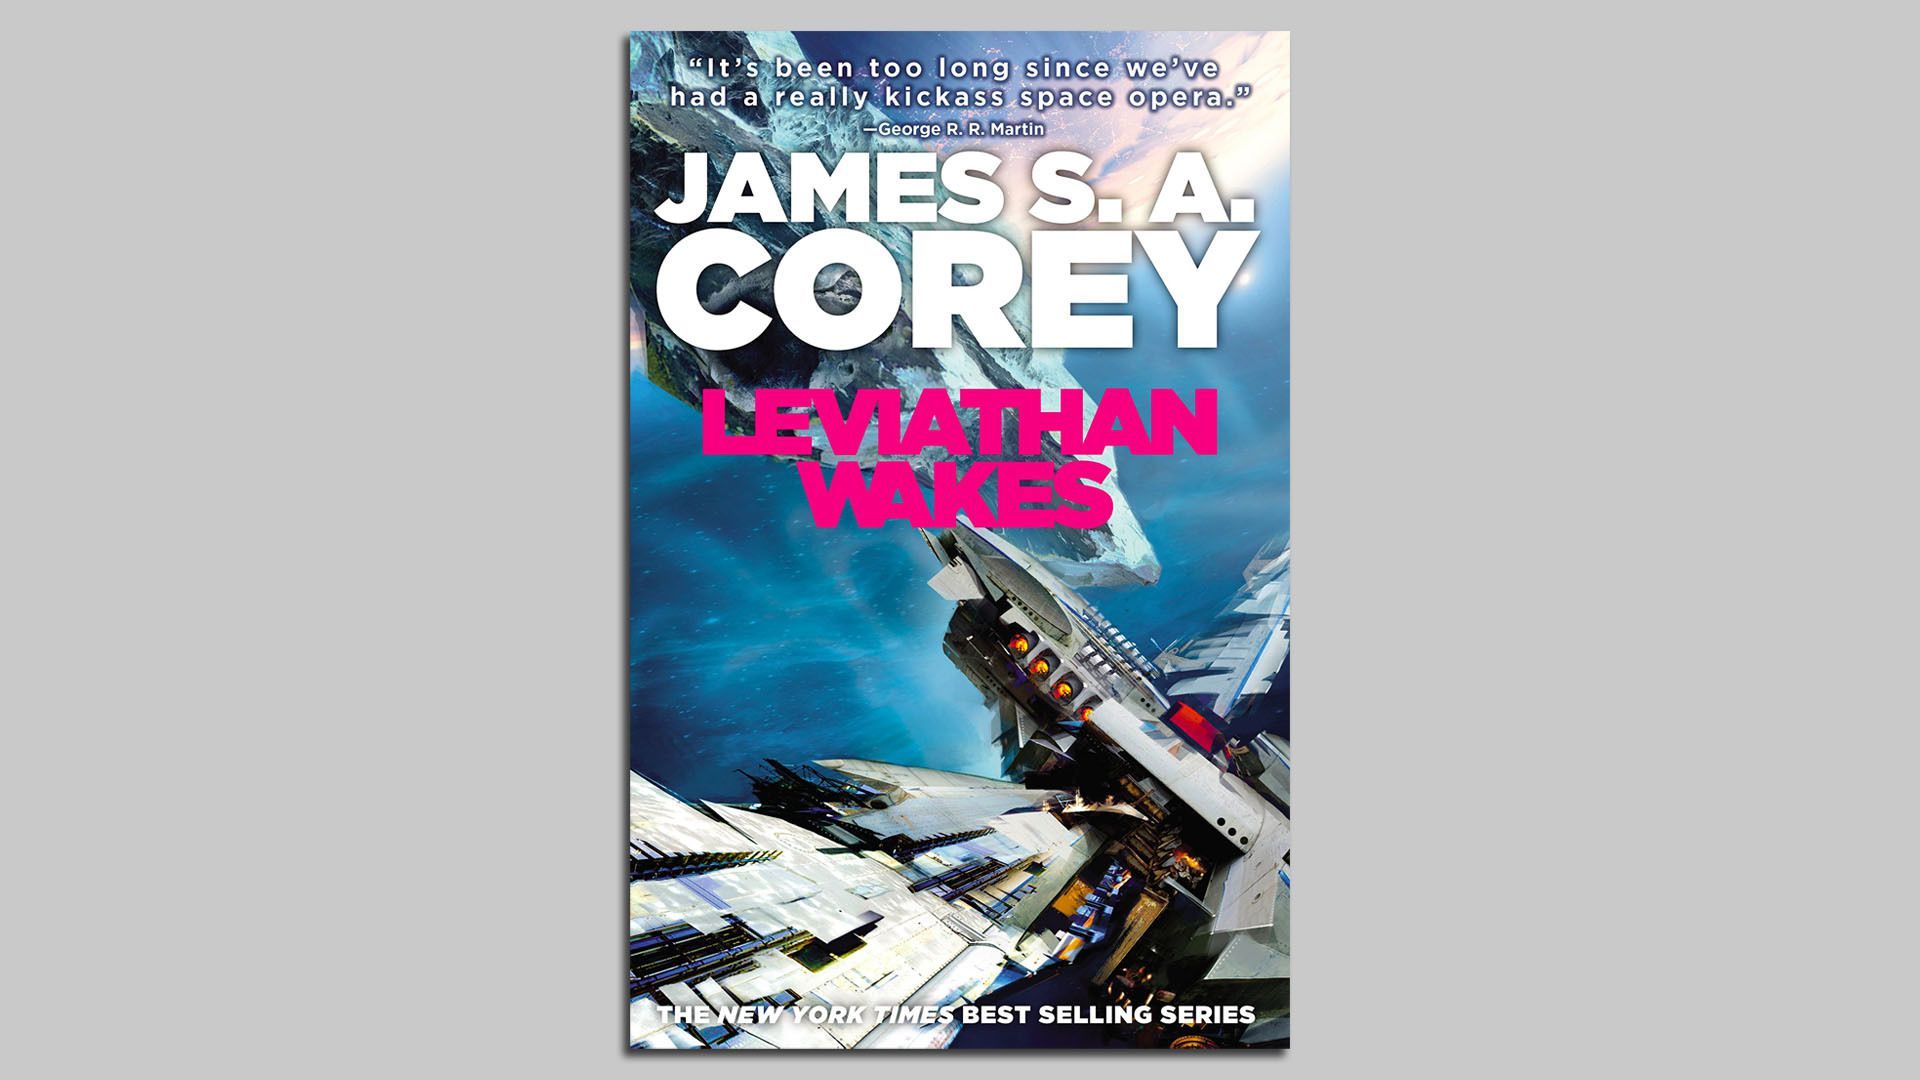 The cover of the first book in "The Expanse" series.